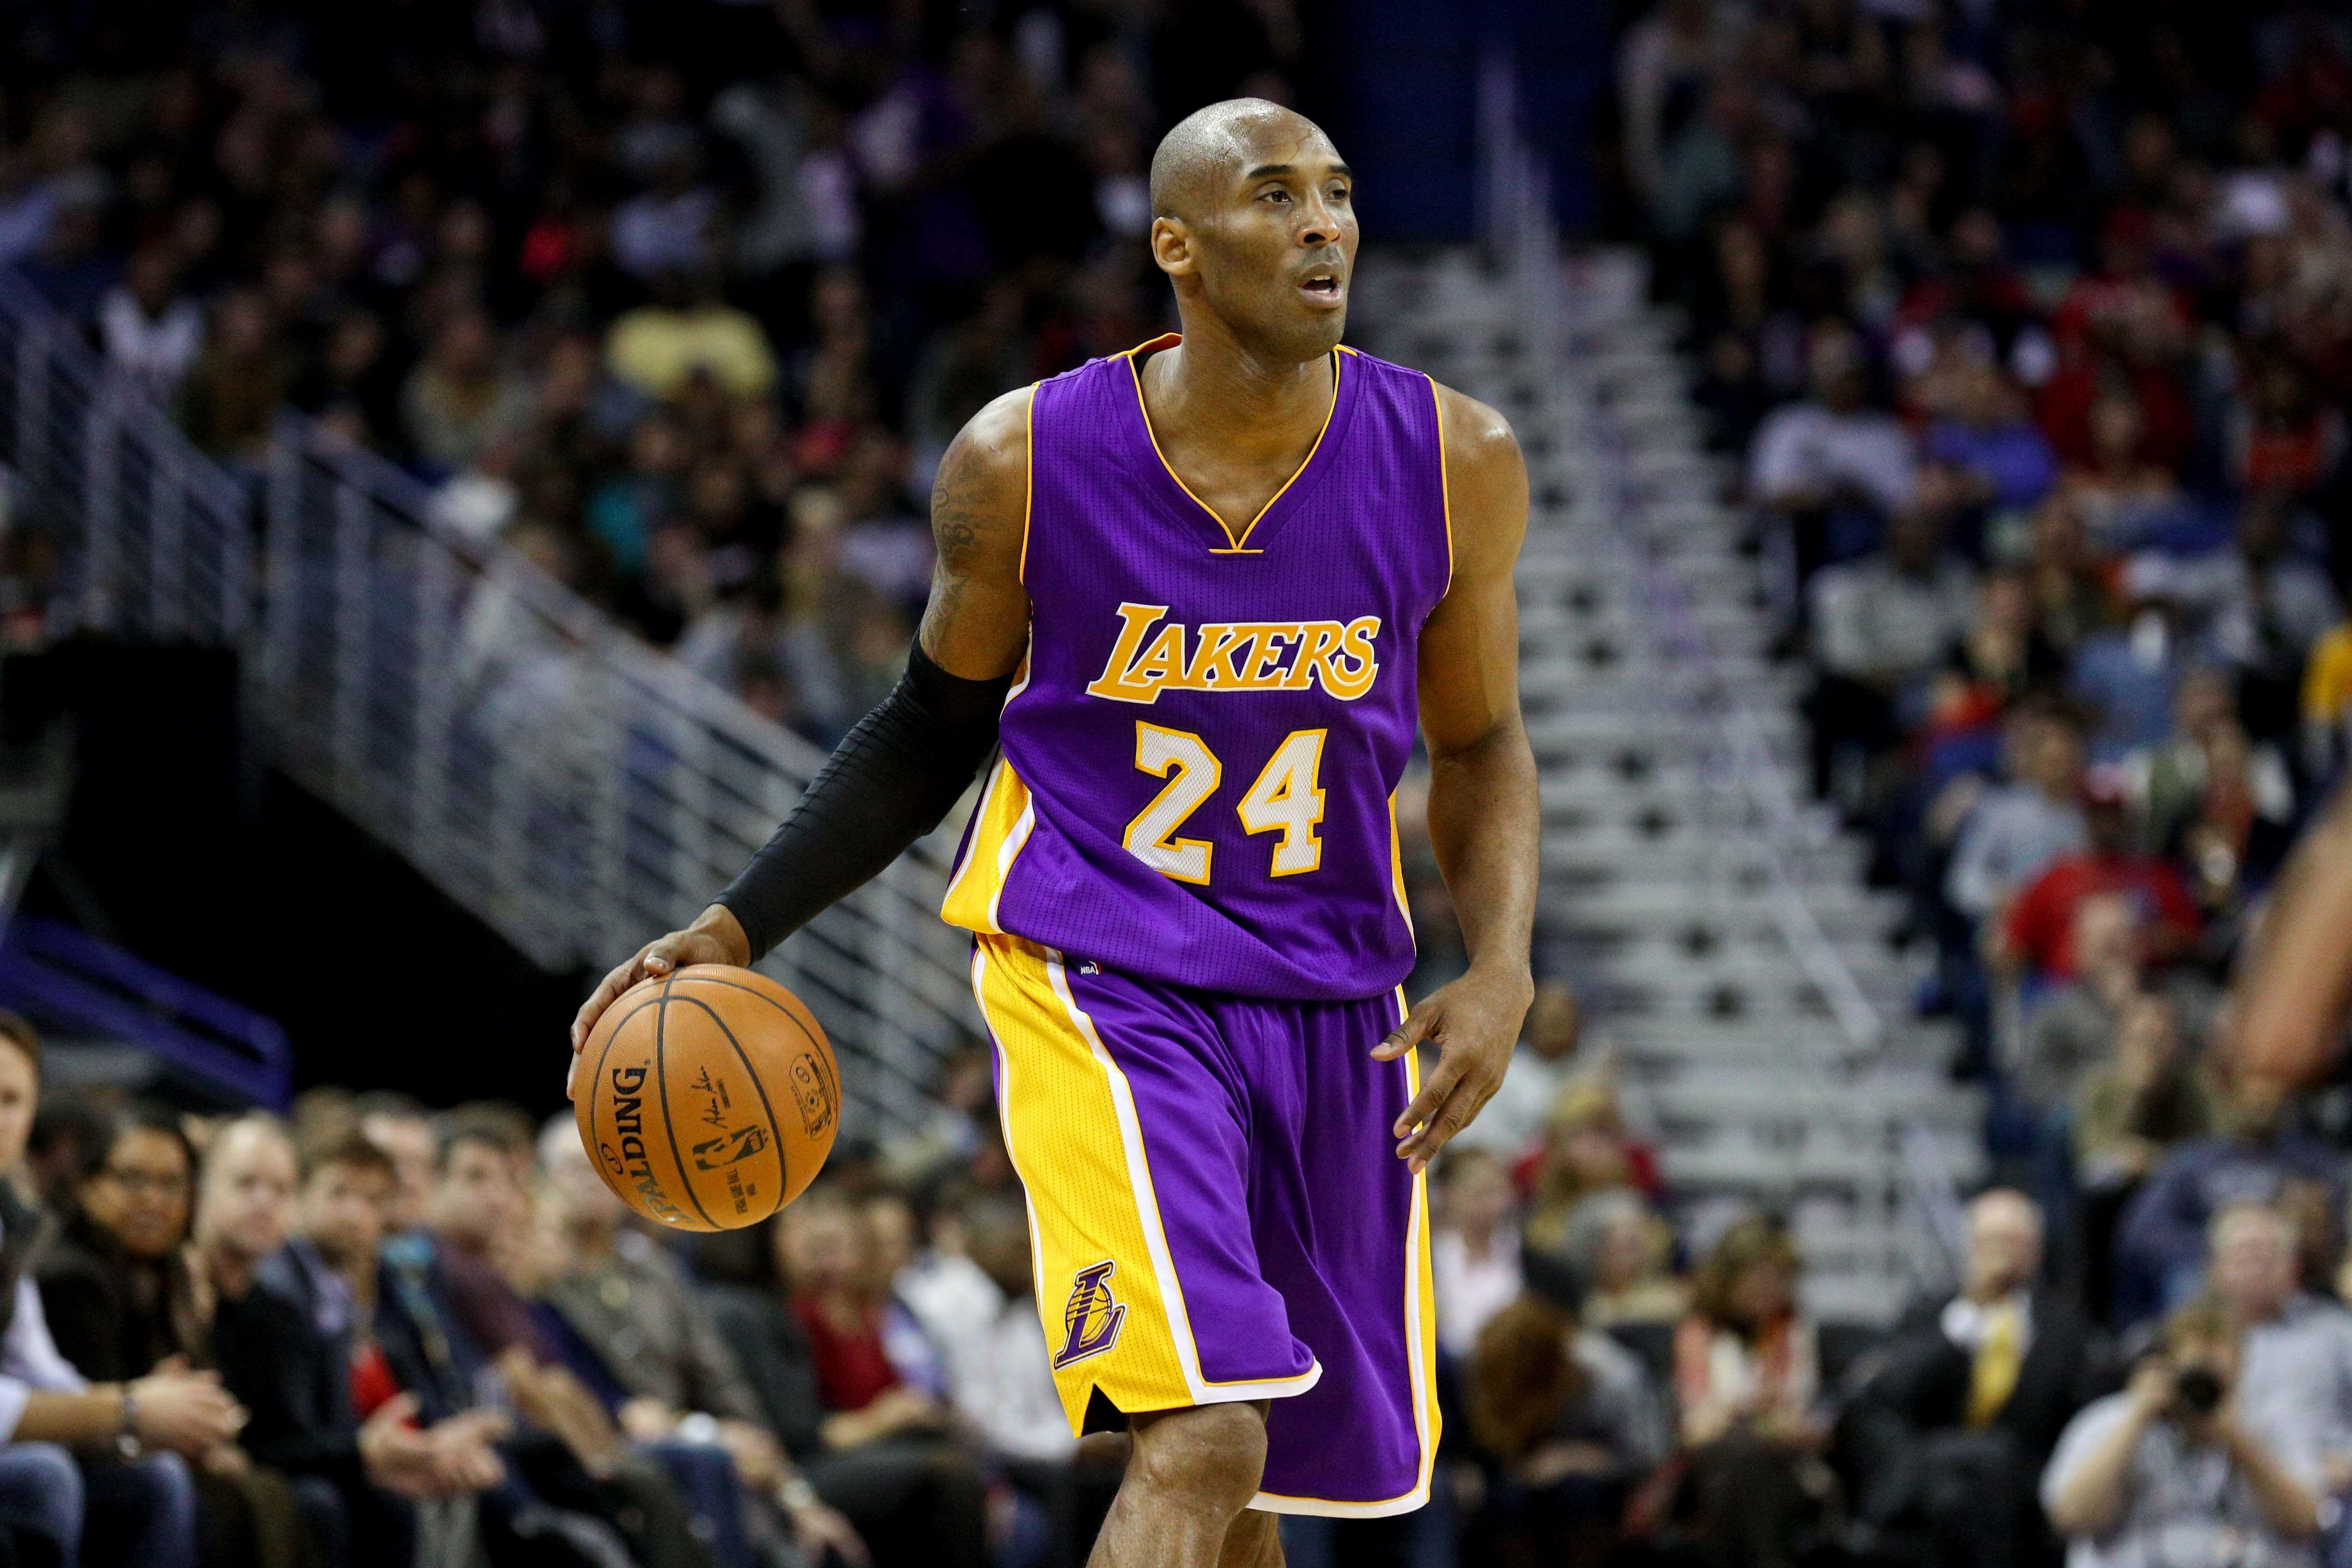 Is It Time For Kobe To Hang It Up? - KyleWilliams23